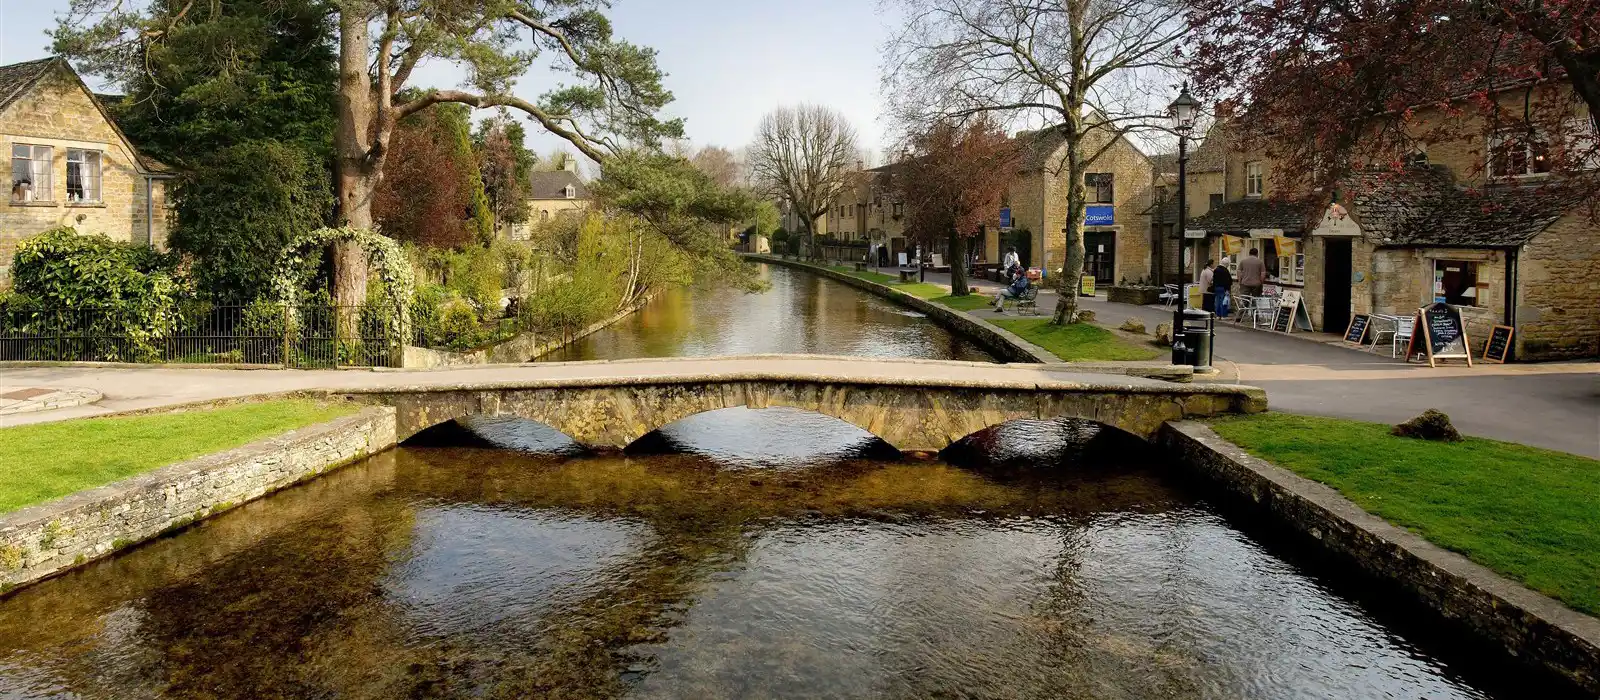 Beautiful Bourton-on-the-Water in the Cotswolds